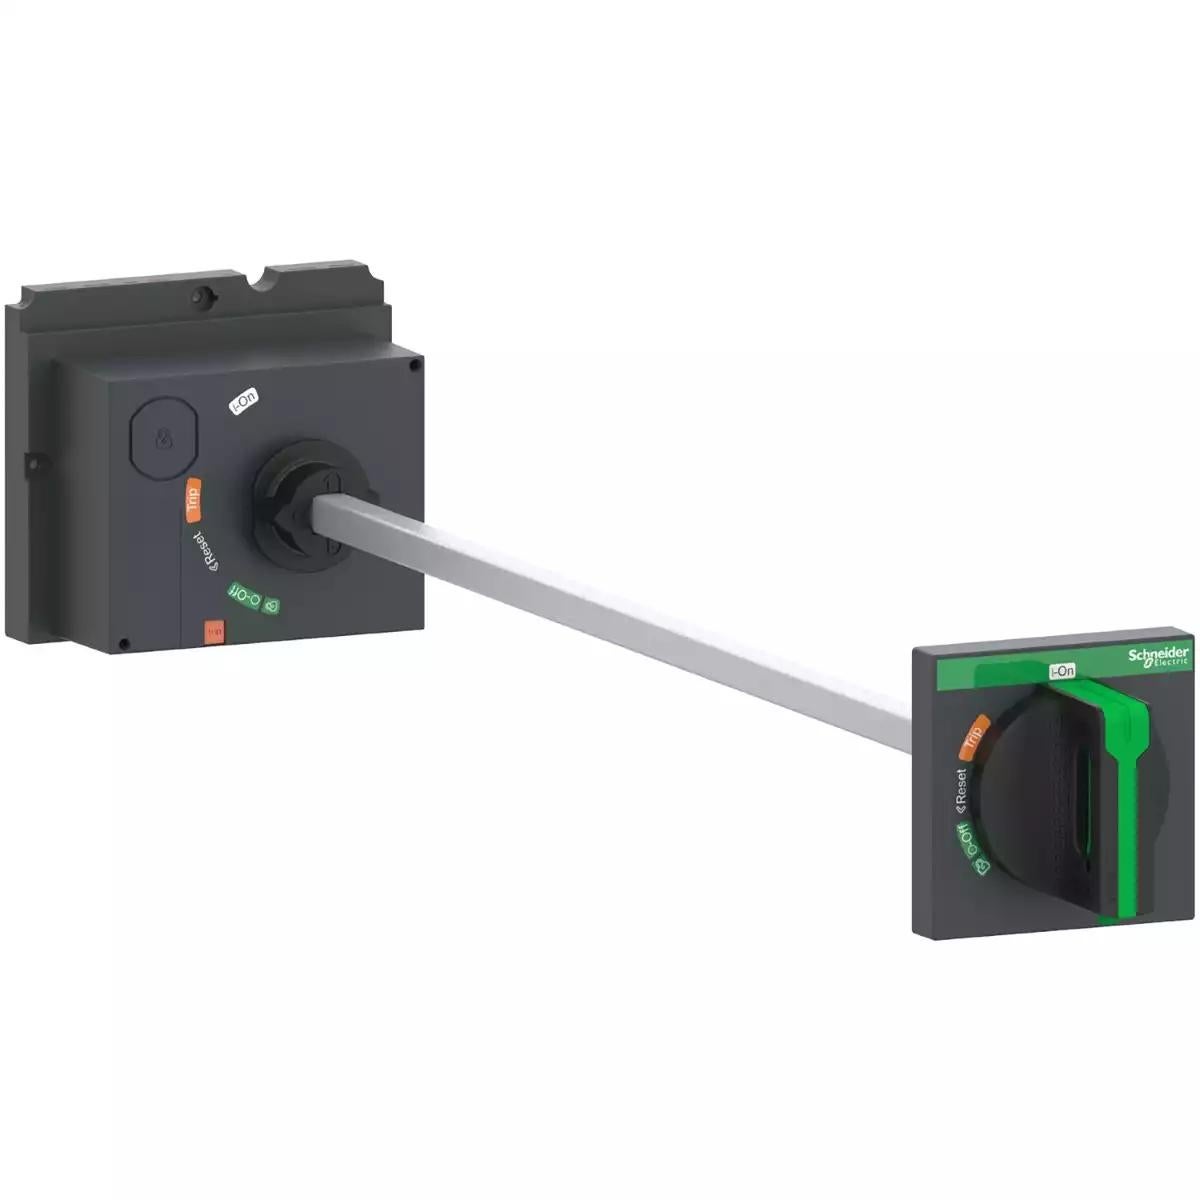 Schneider Electric extended rotary handle, ComPacT NSX 100/160/250, black handle, shaft length 185 to 600 mm, IP55